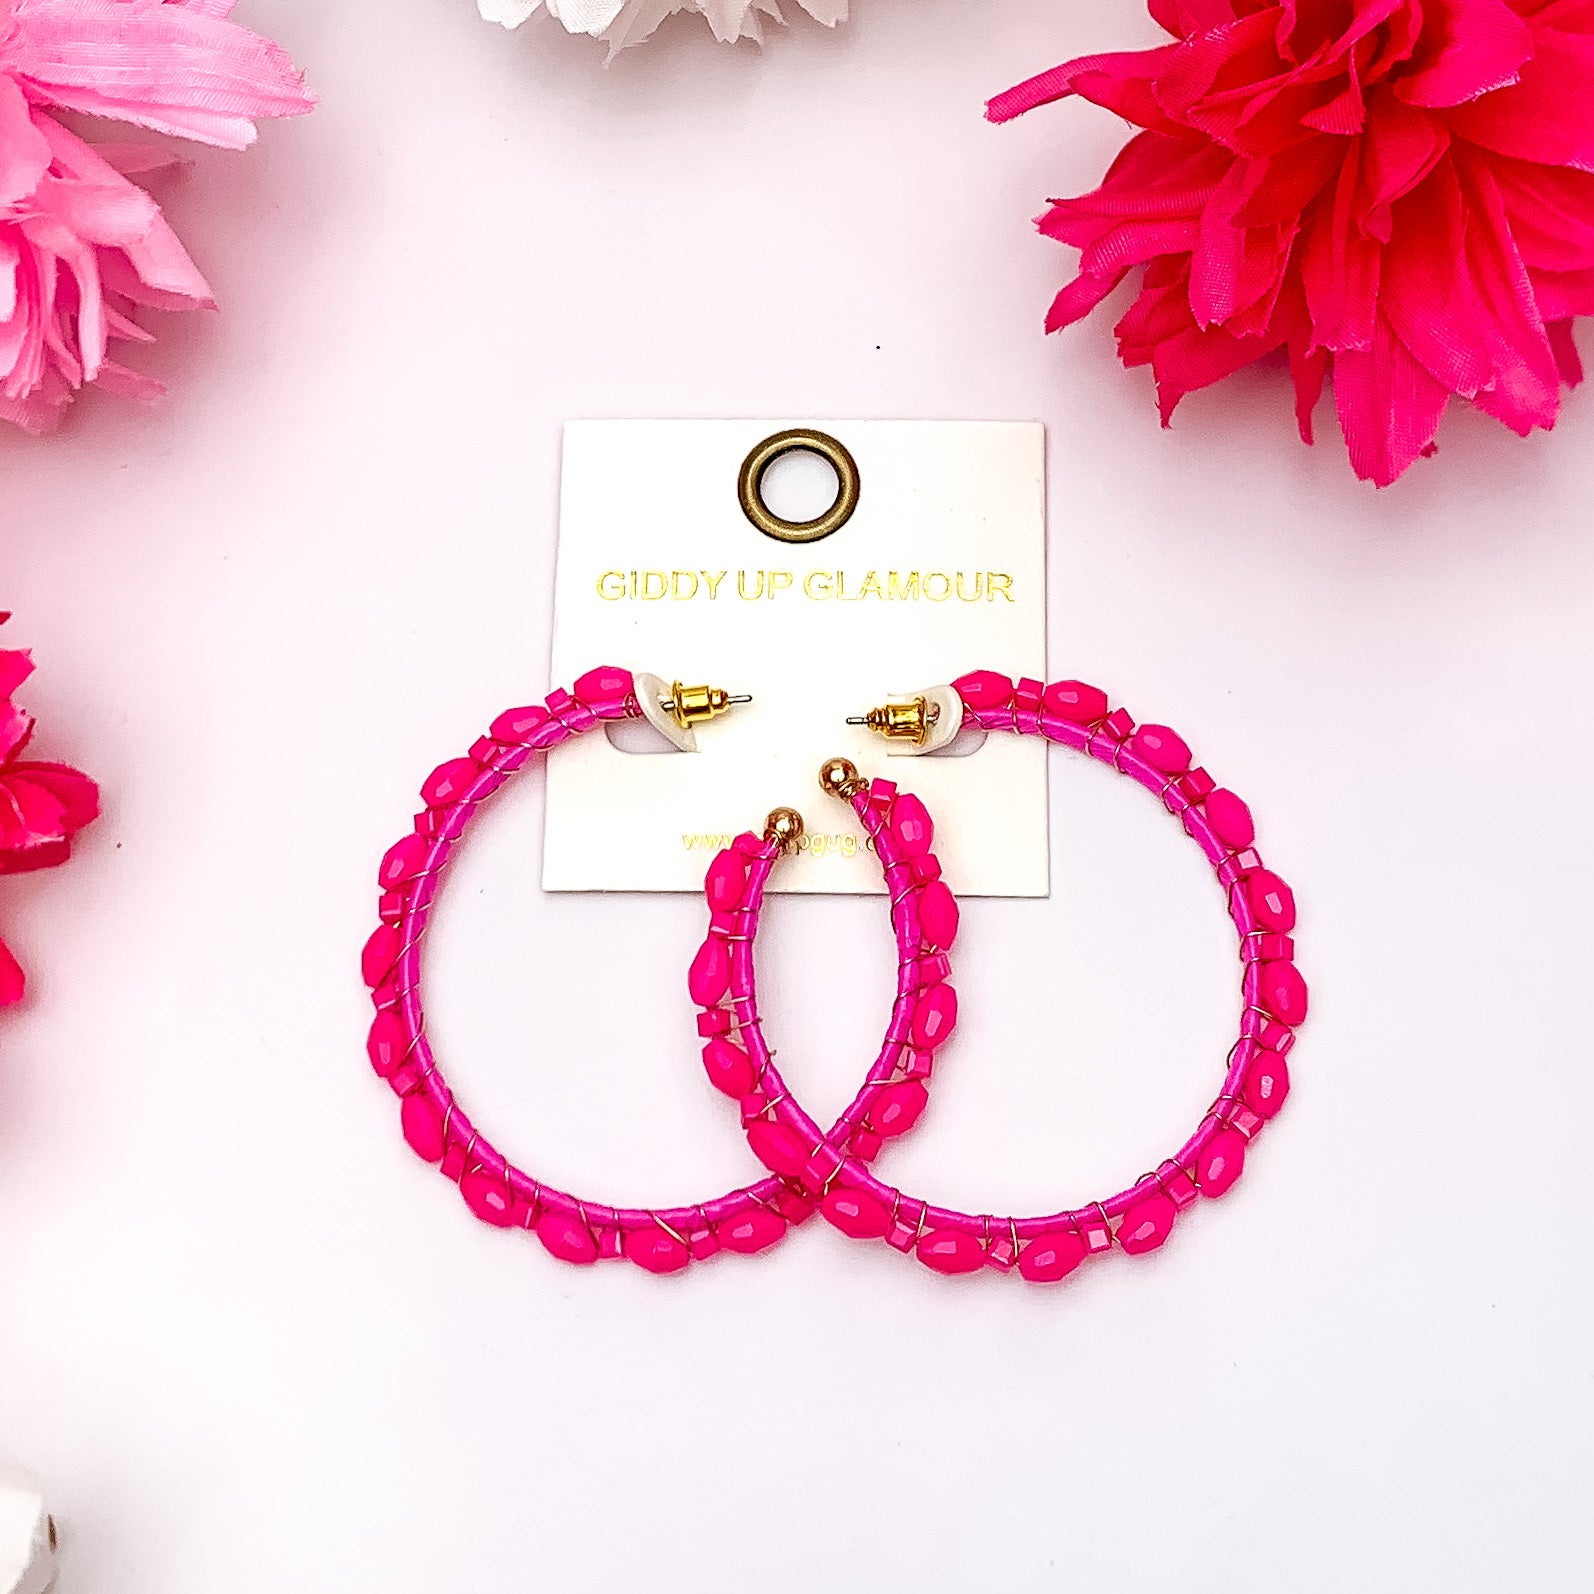 Large Hoop Earrings Outlined with Crystals in Hot Pink. Pictured on a white background surrounded by pink flowers.